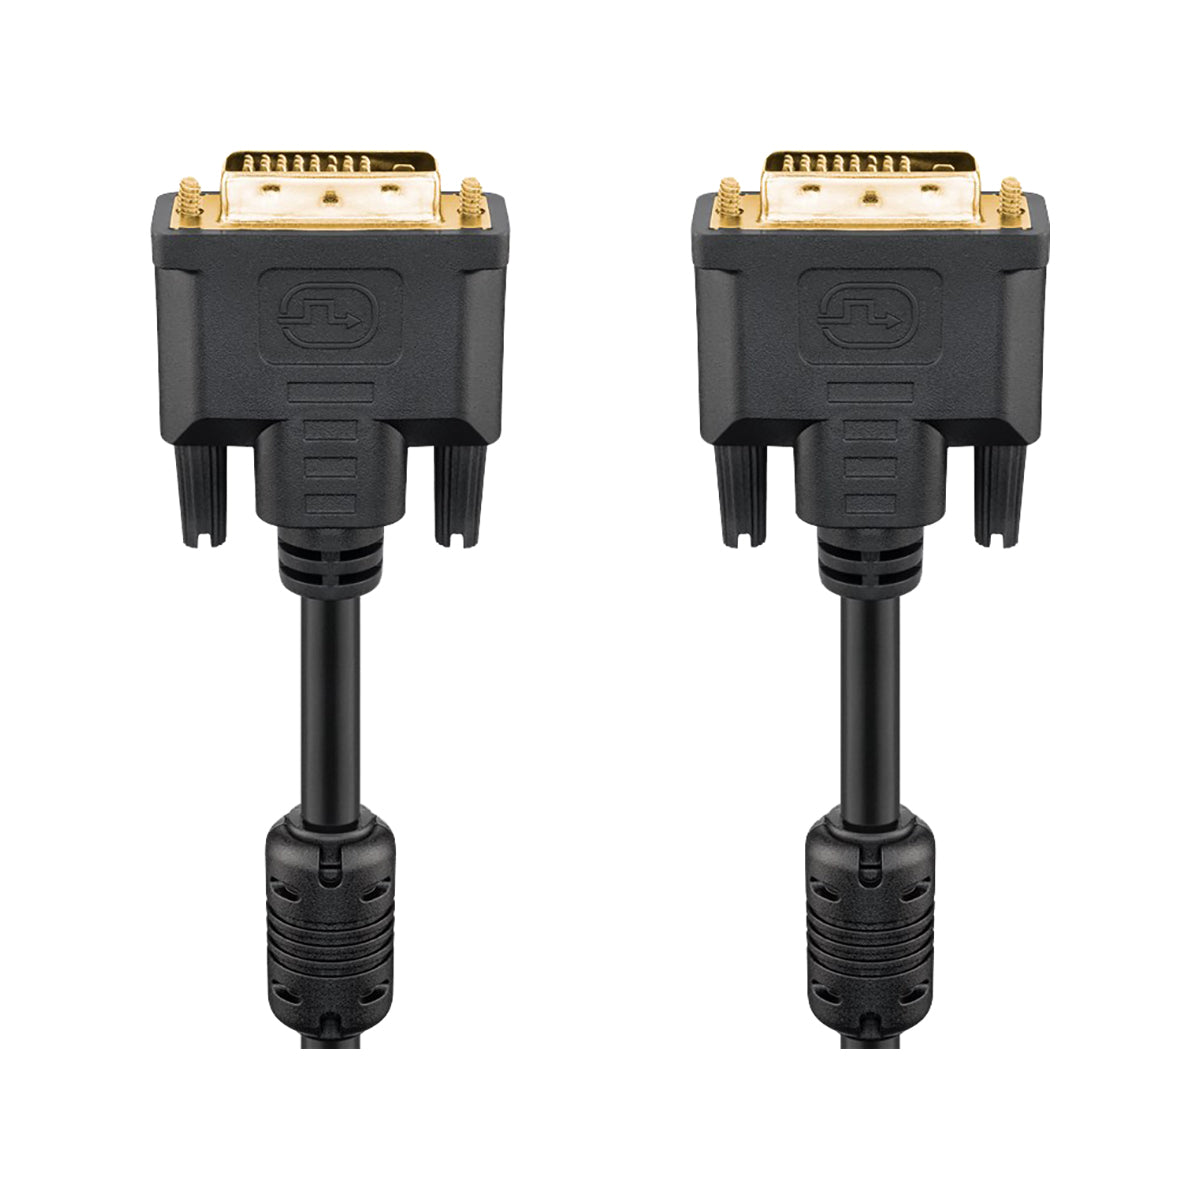 Goobay DVI-D Full HD Cable Dual Link, Gold-Plated Cable 15 m for Monitors/Projectors